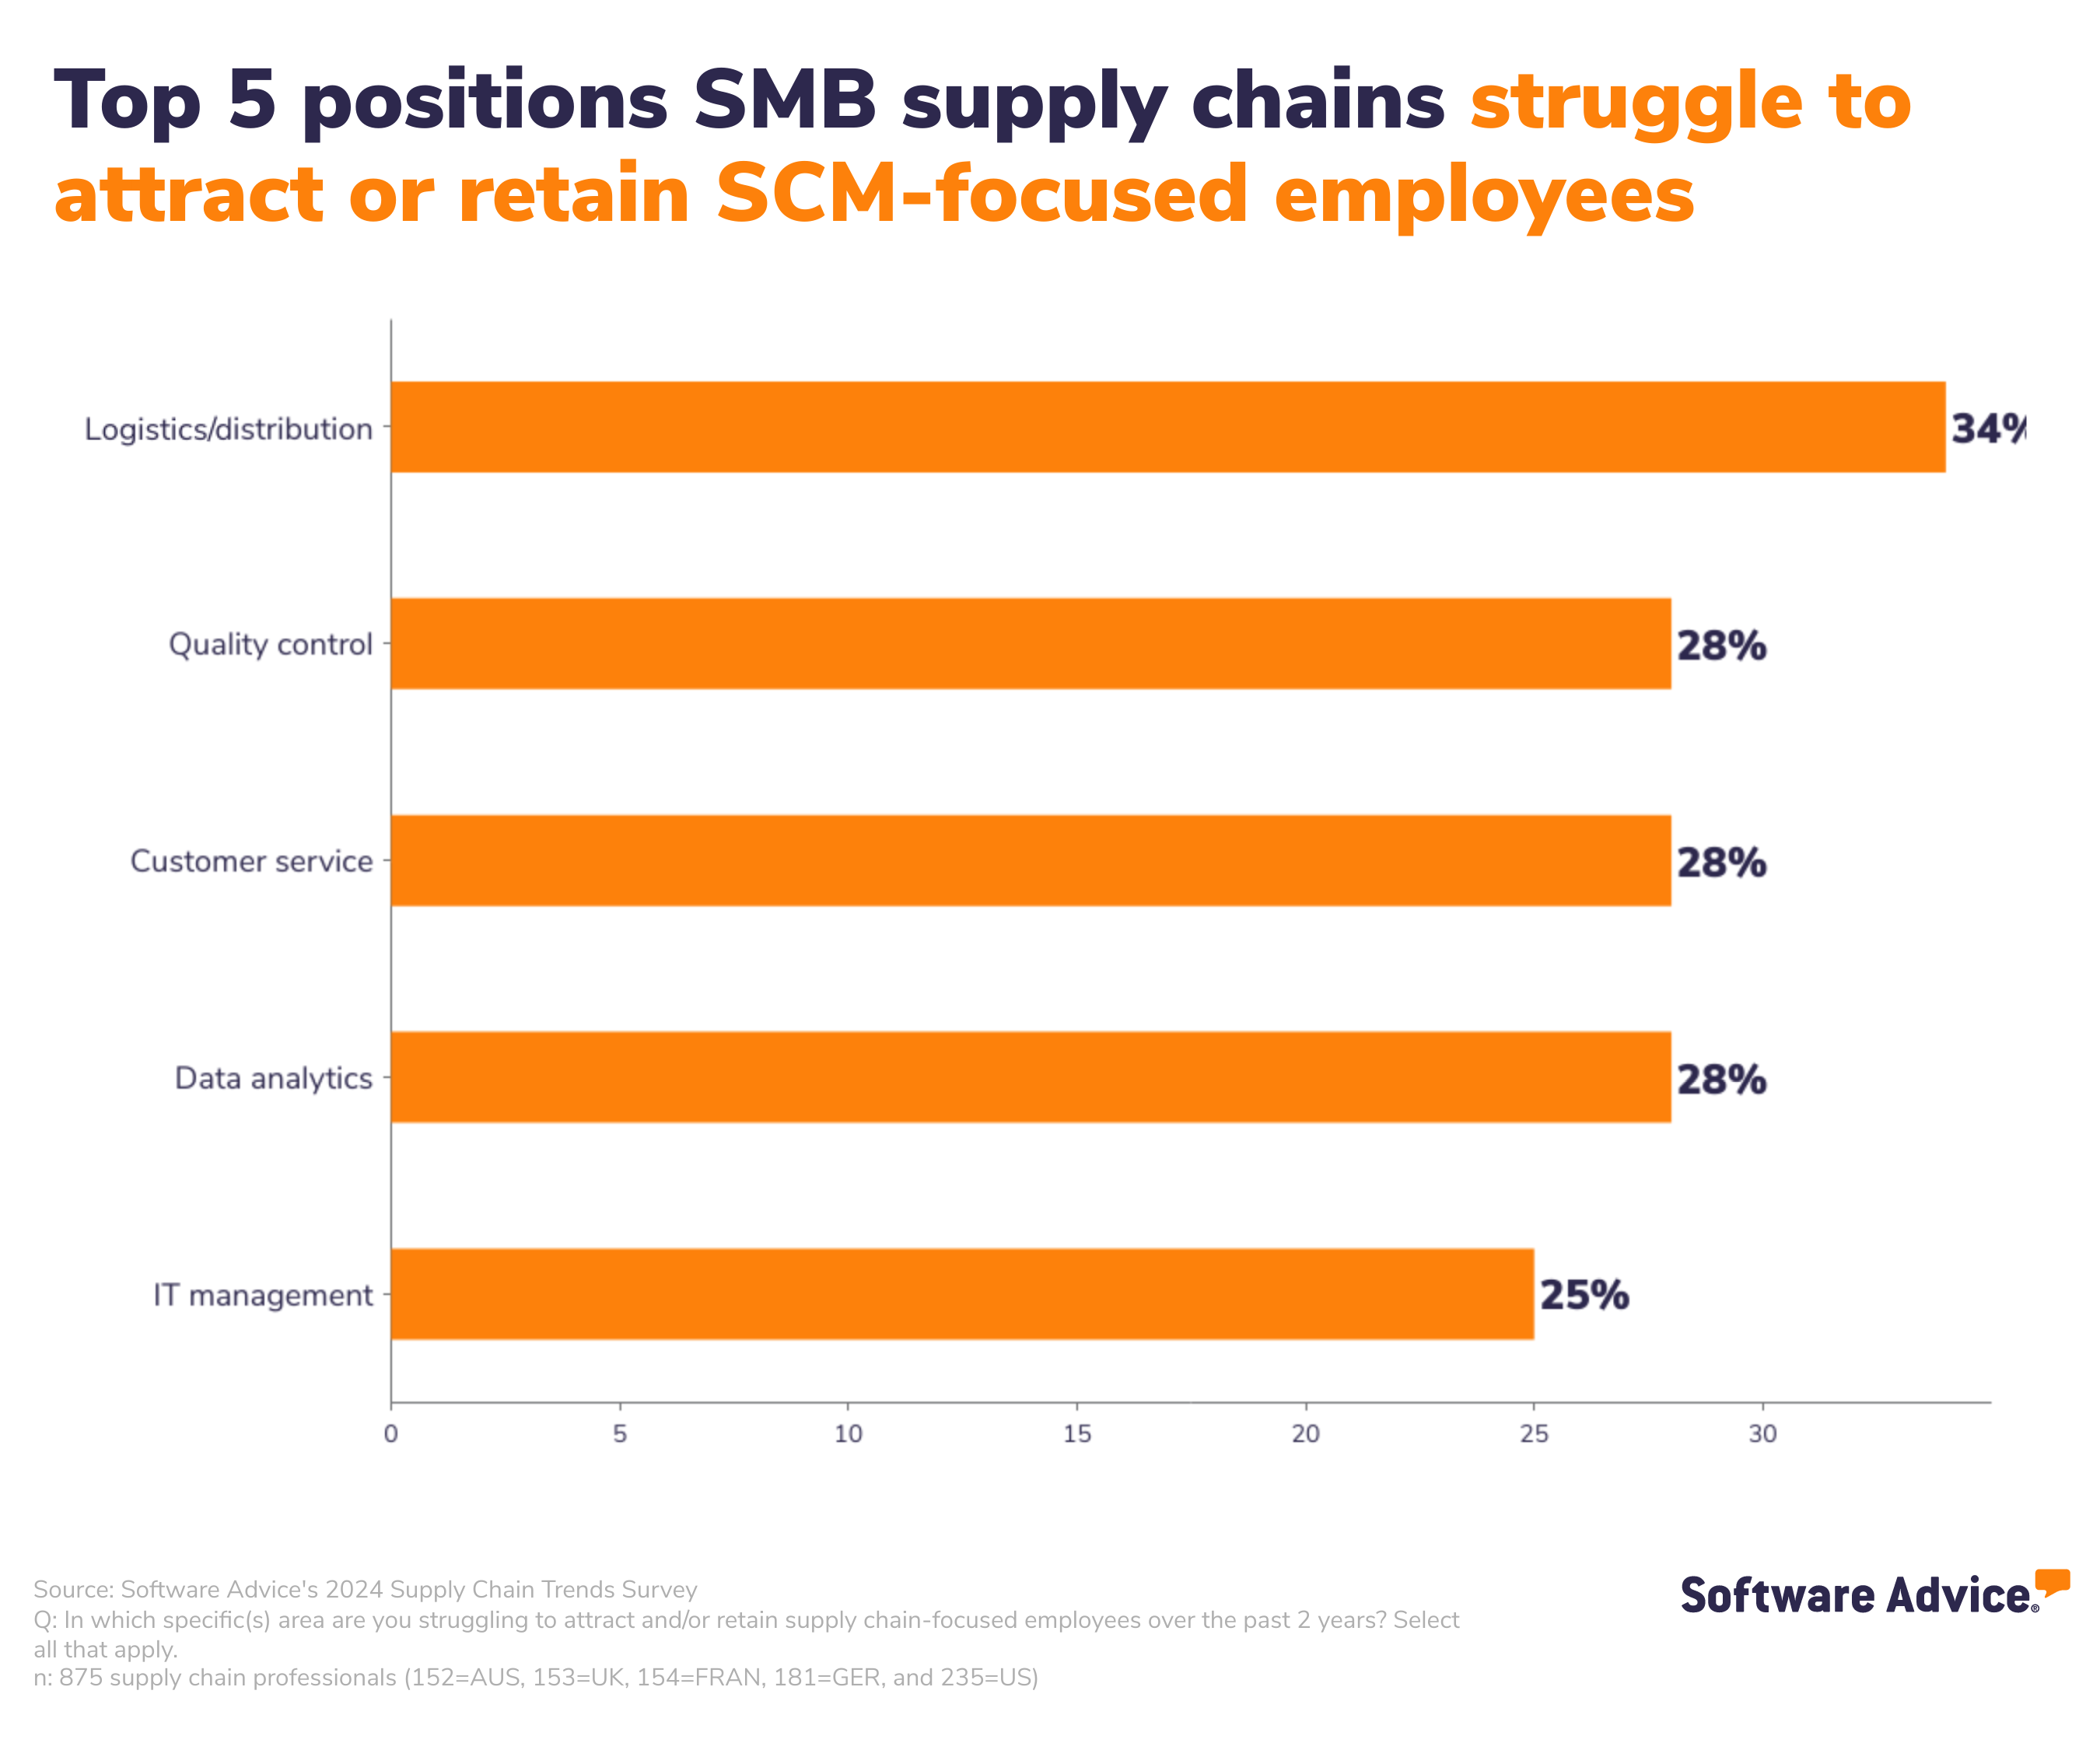 Top 5 positions SMB supply chains struggle to attract or retain SCM-focused employees